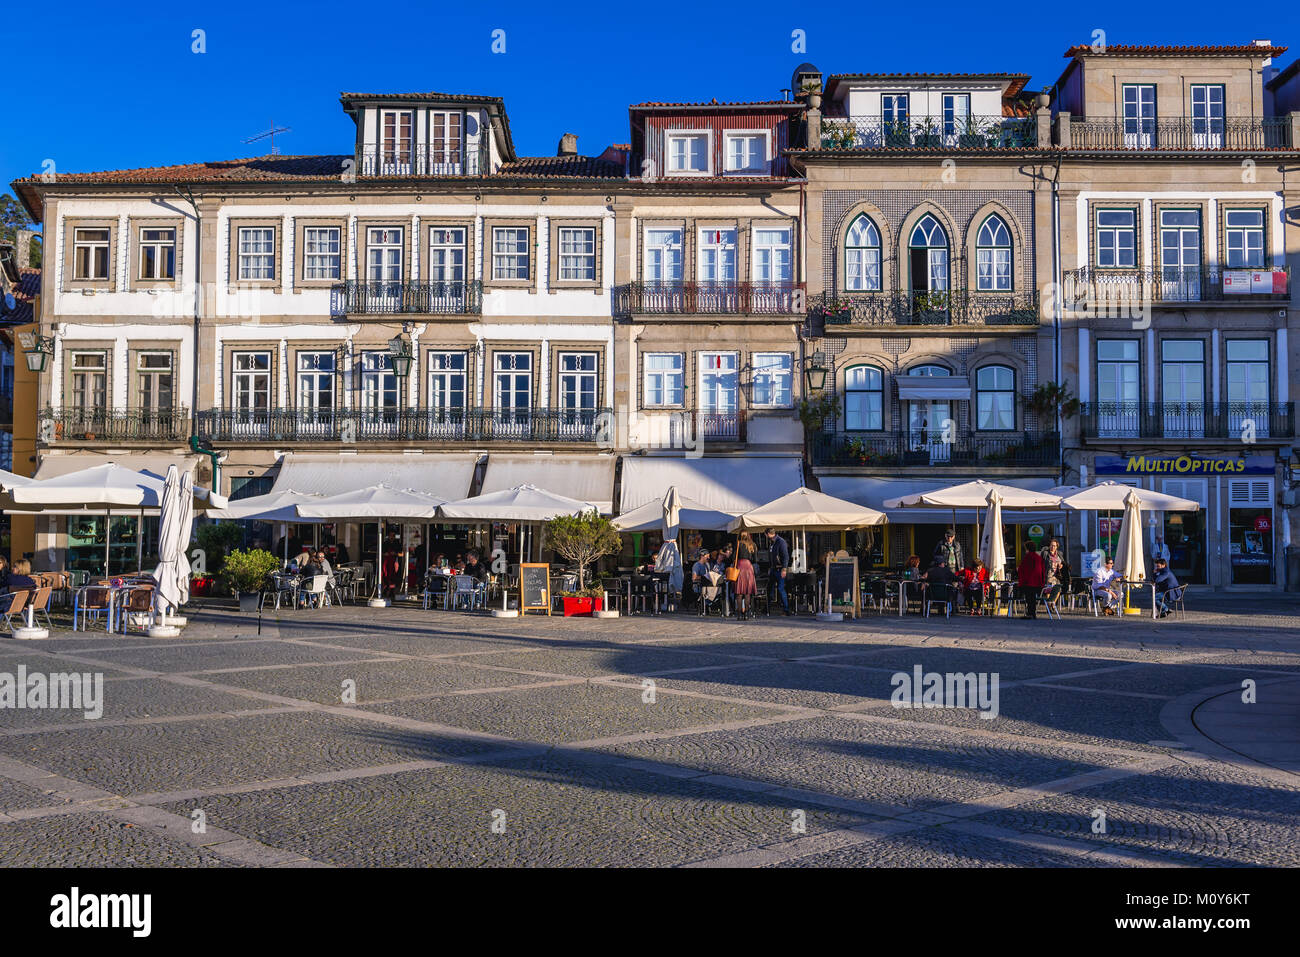 Houses on Camoes Square in Ponte de Lima city, part of the district of Viana do Castelo, Norte region of Portugal Stock Photo